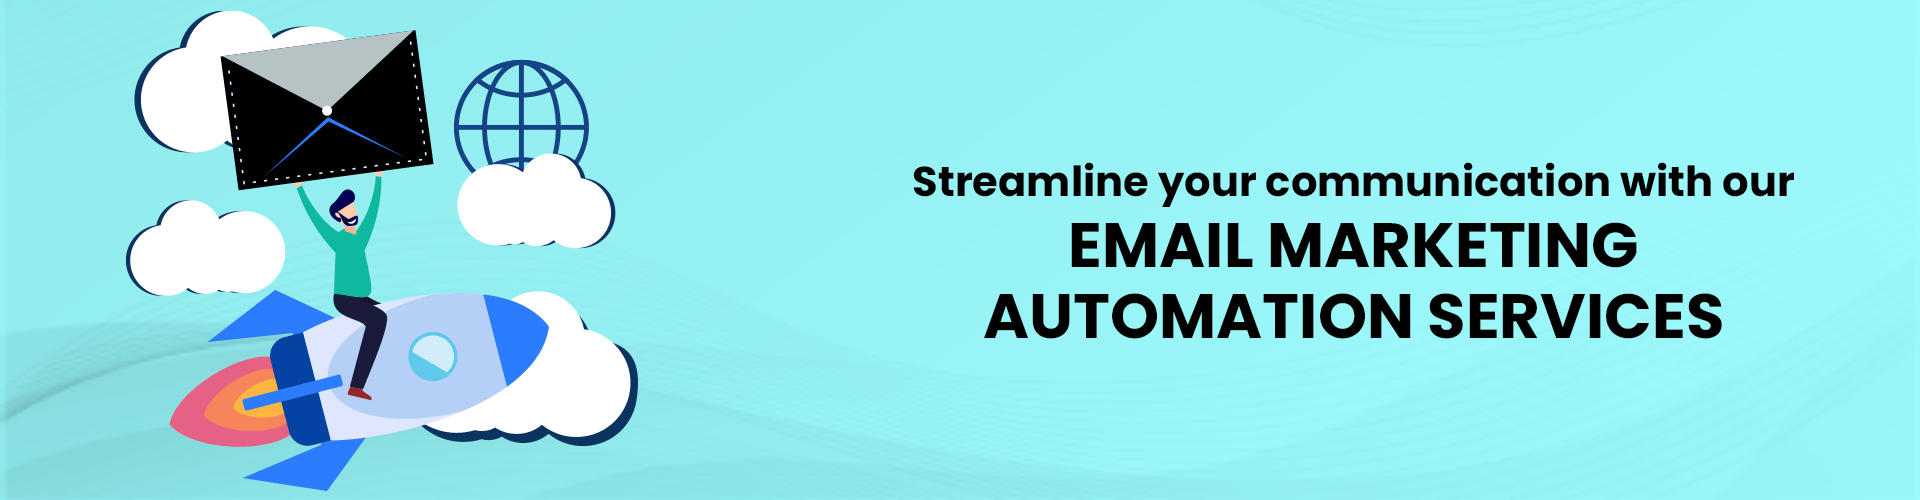 Email Marketing Automation Services